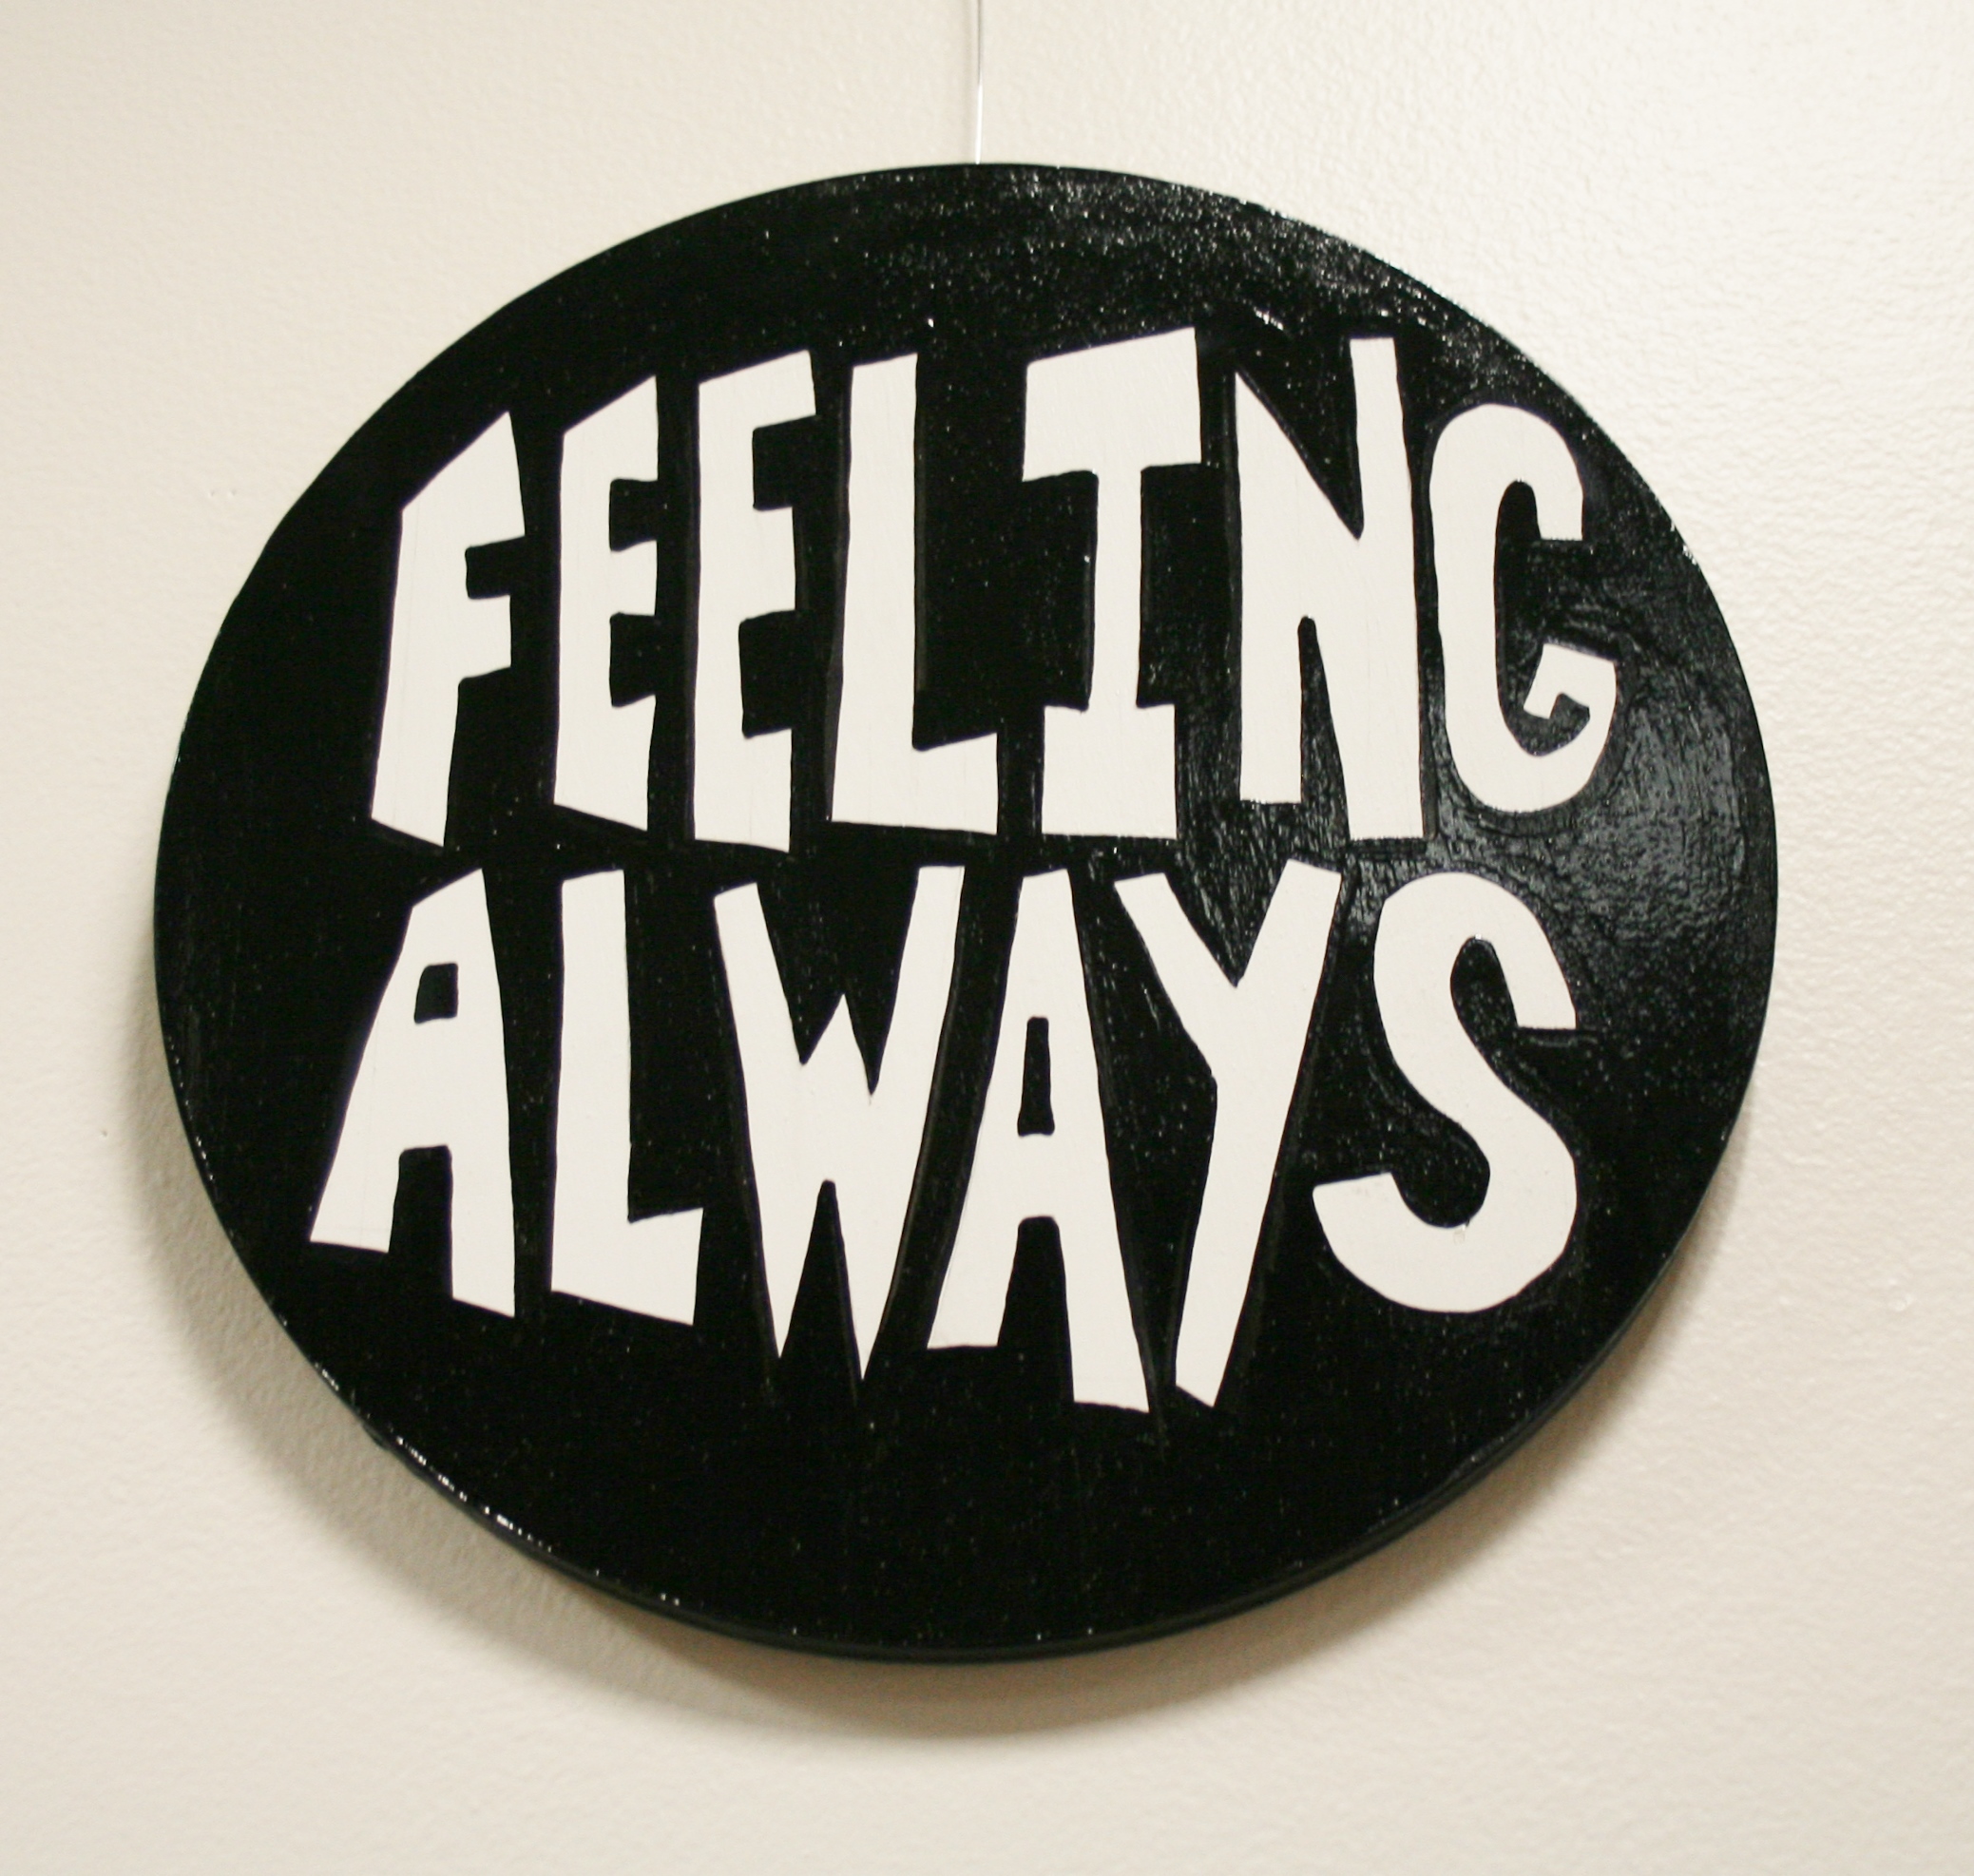 Round wall work reading, "Feeling always." in white letters against a black background